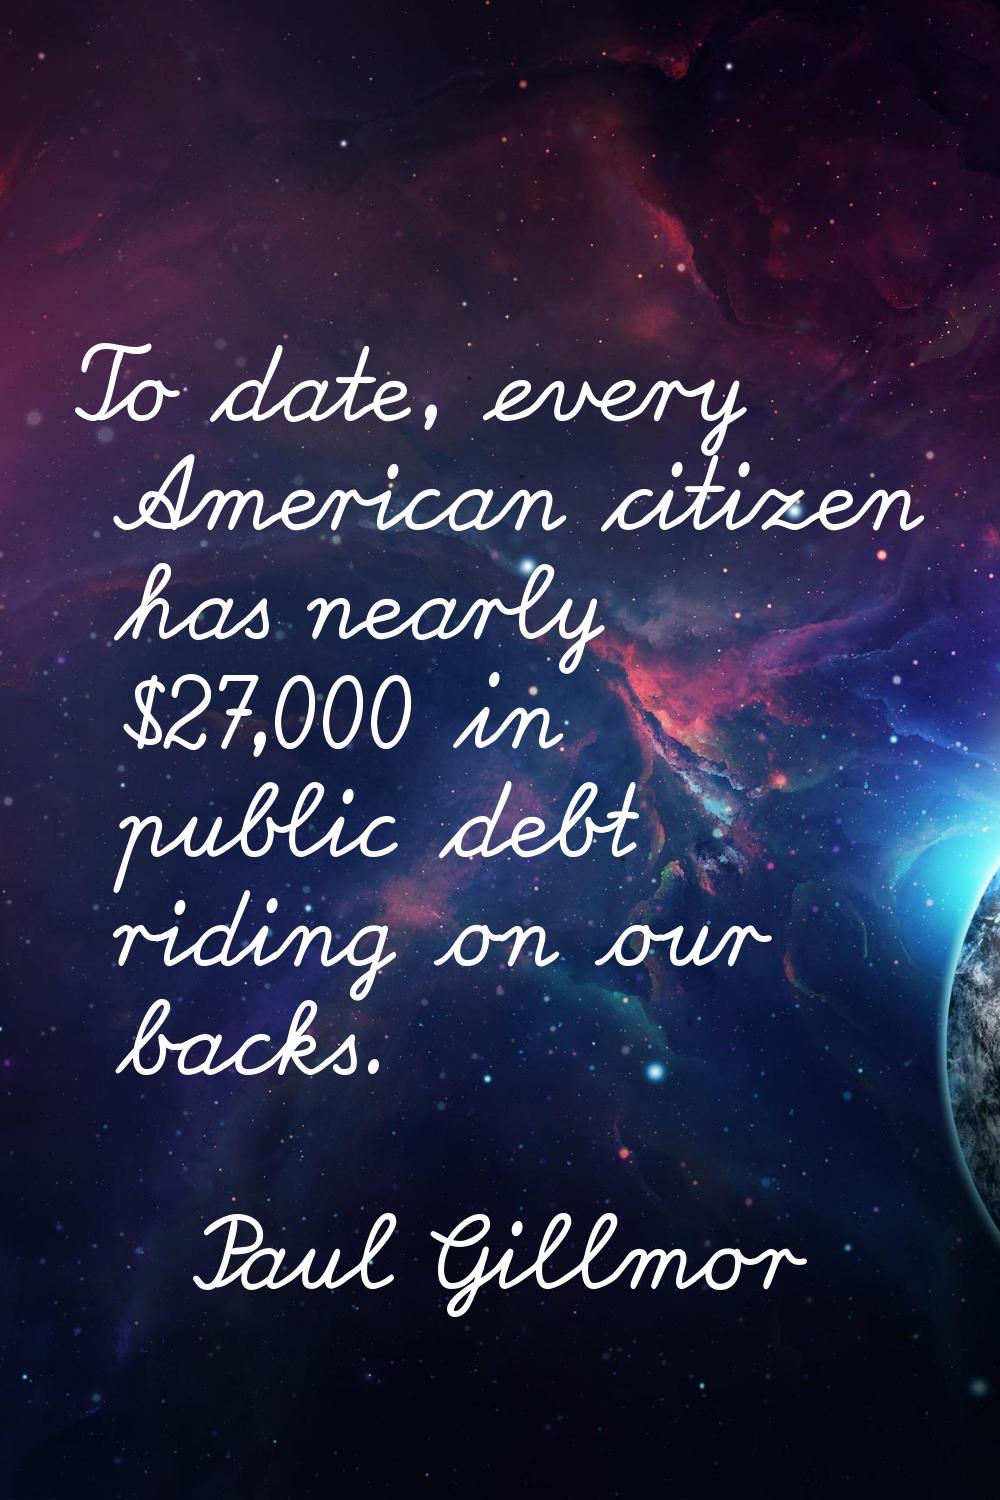 To date, every American citizen has nearly $27,000 in public debt riding on our backs.